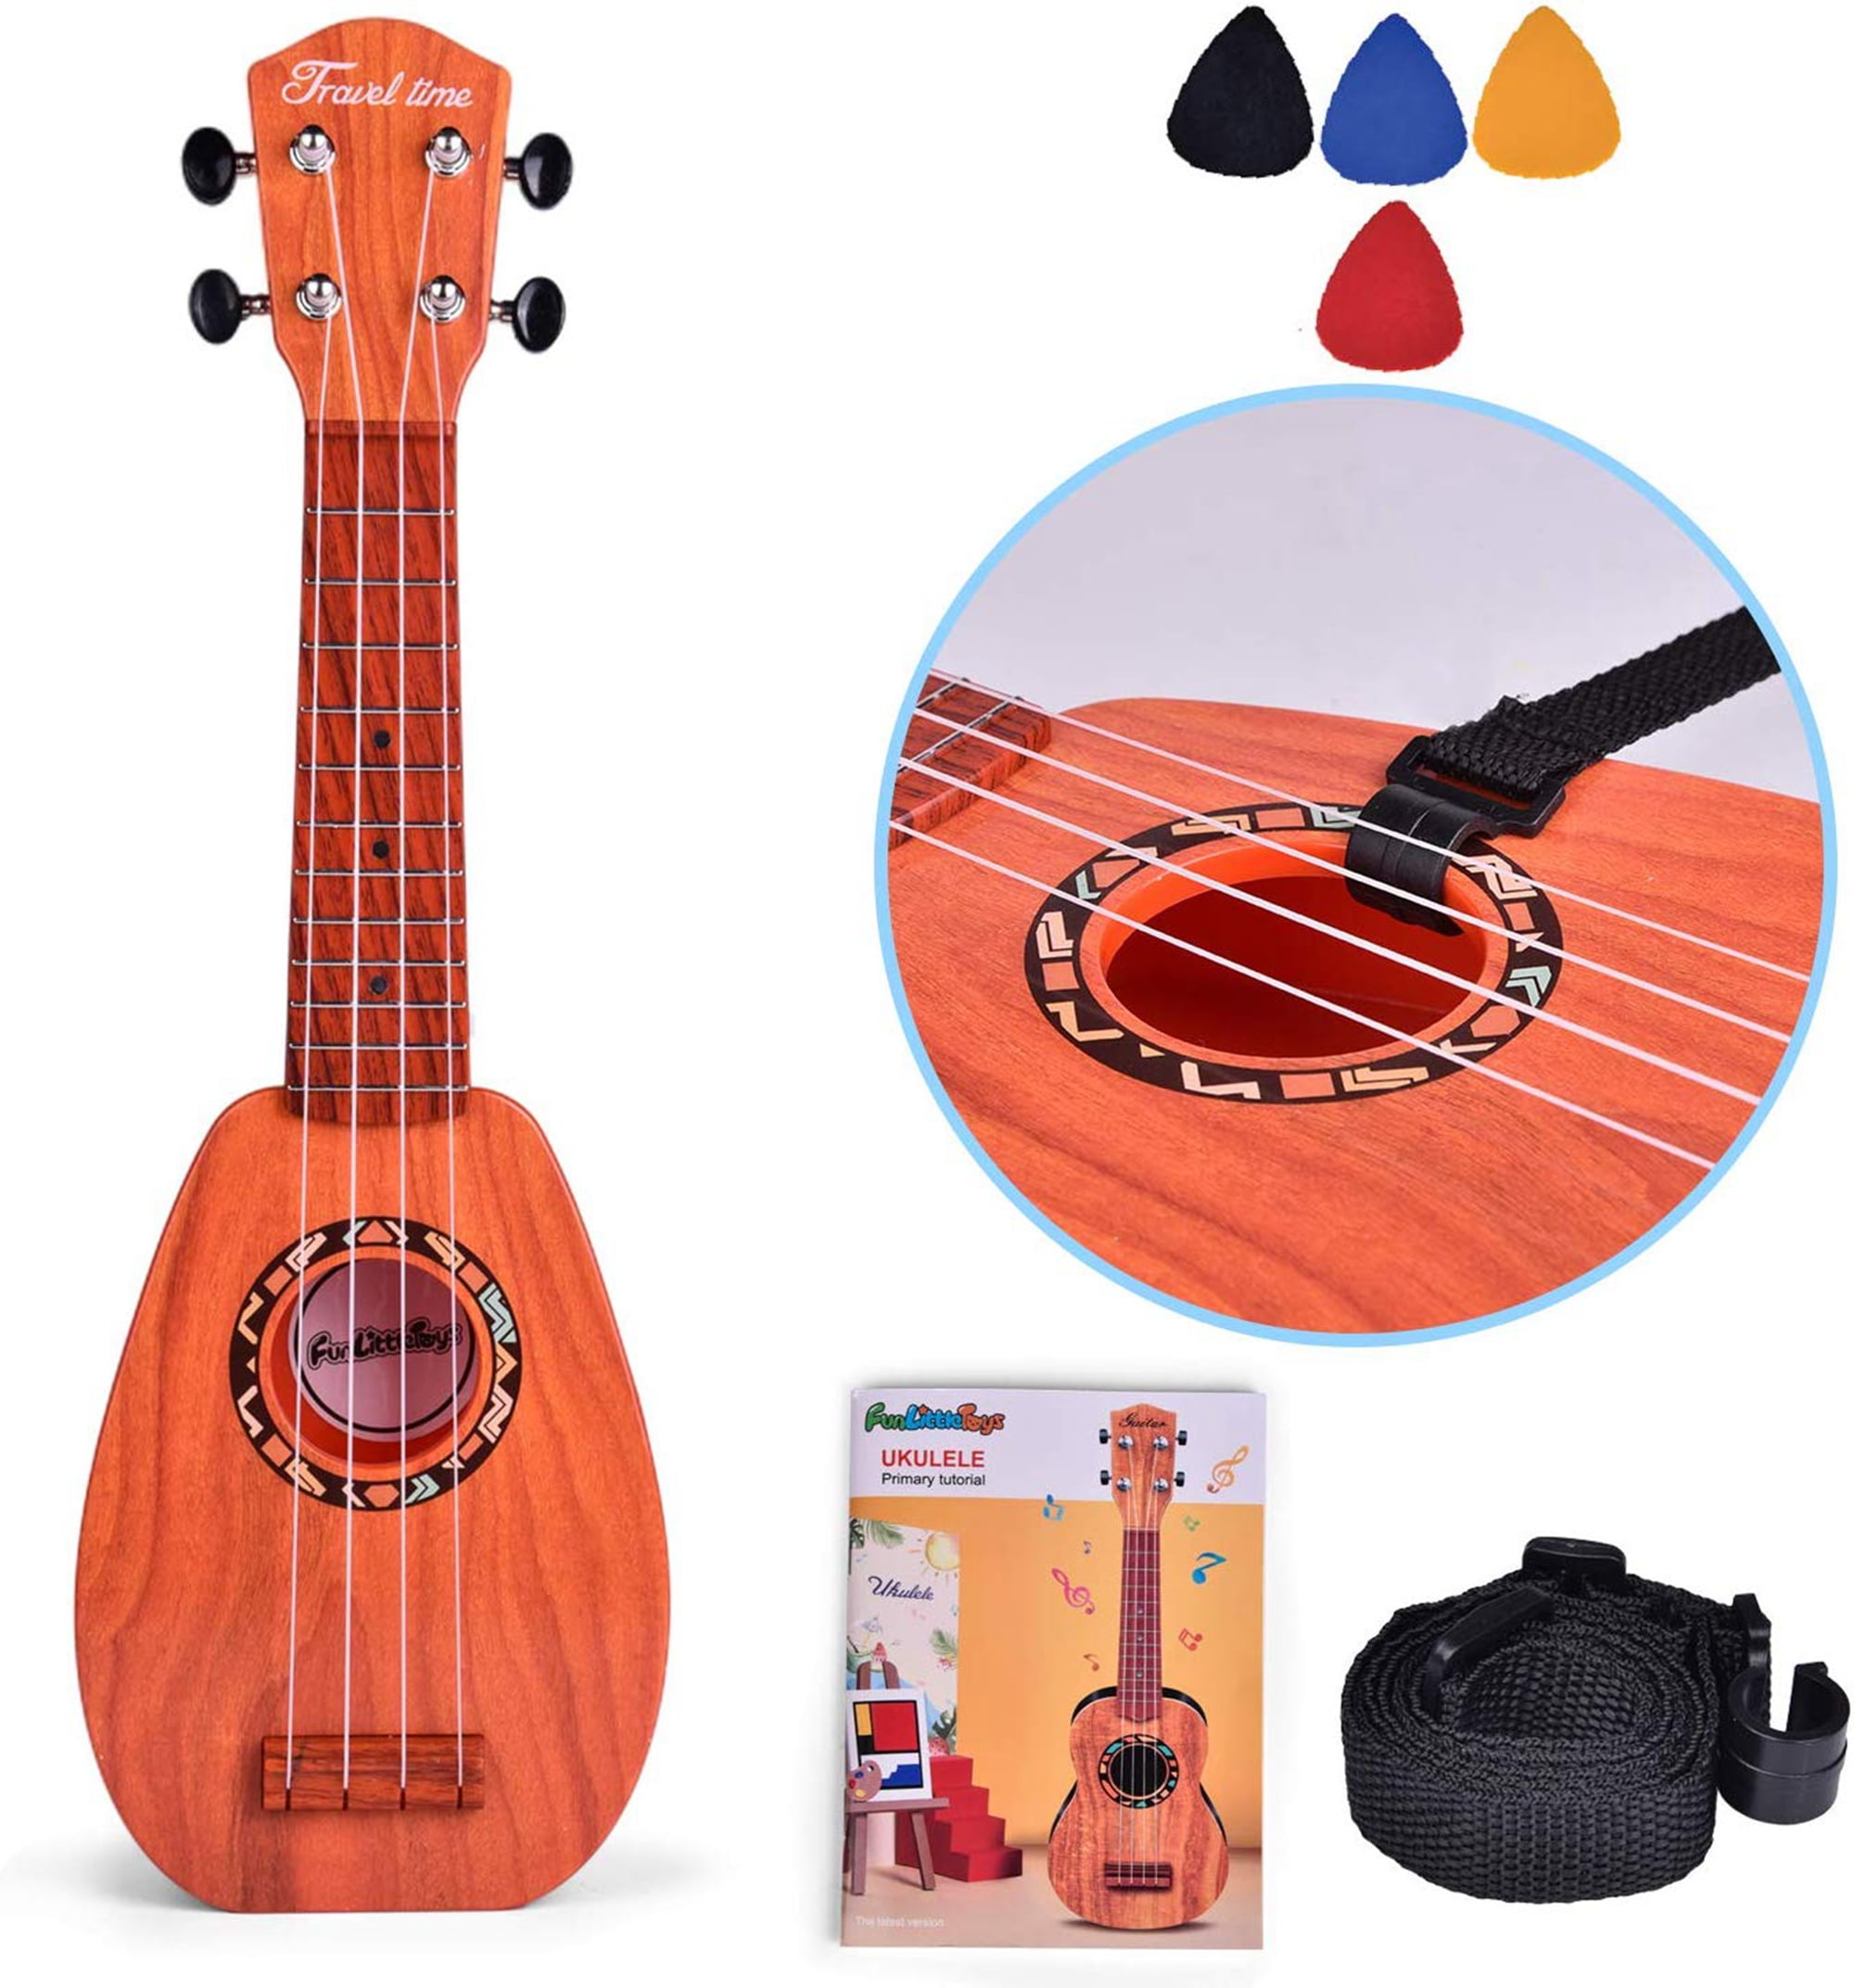 Toy Guitar Ukulele 17 Inch educational Toy Guitar Music Instrument for kids 